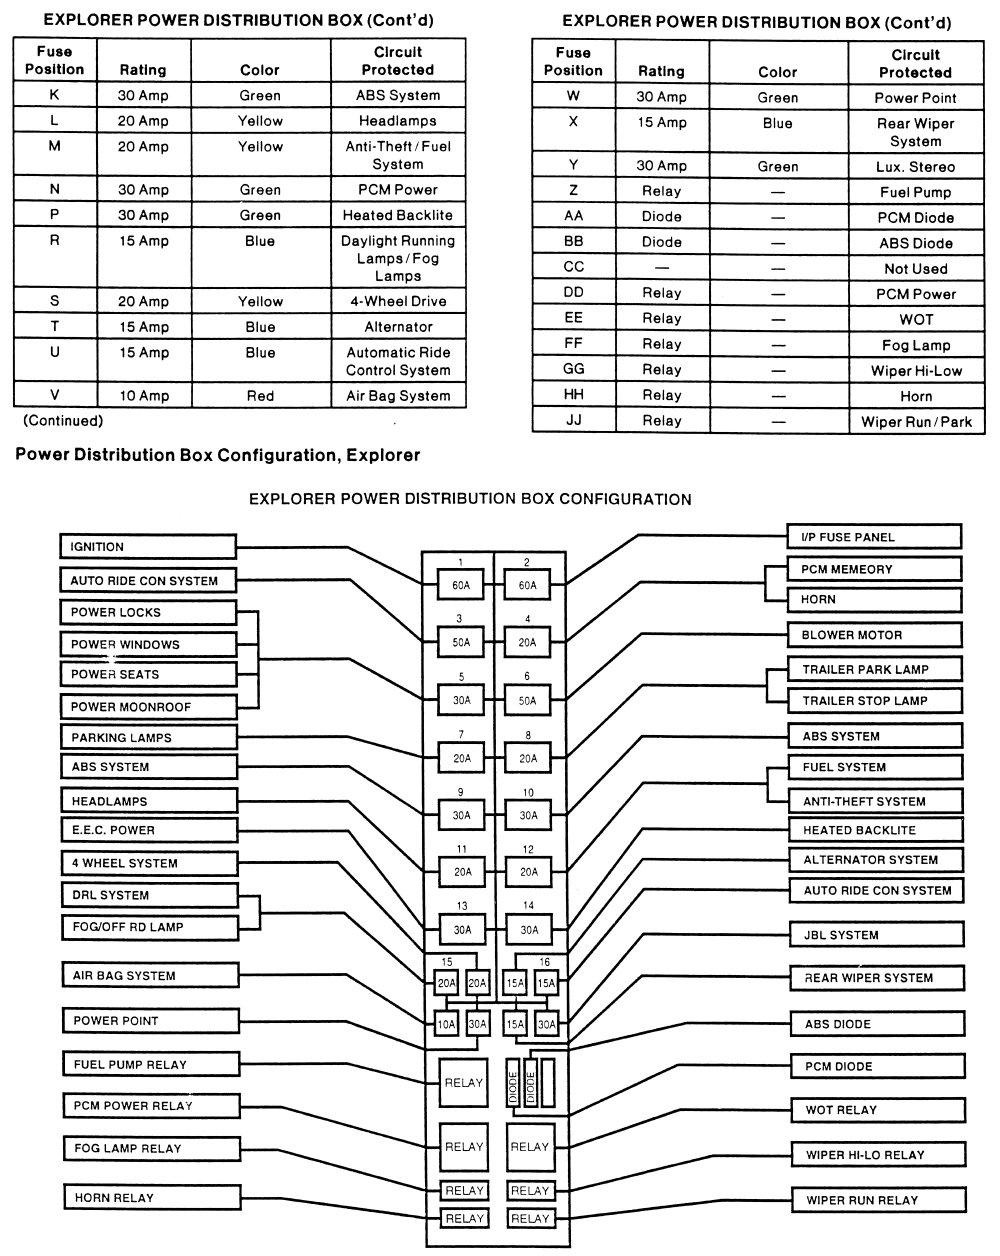 Fuse Box Diagram For 98 Ford Expedition